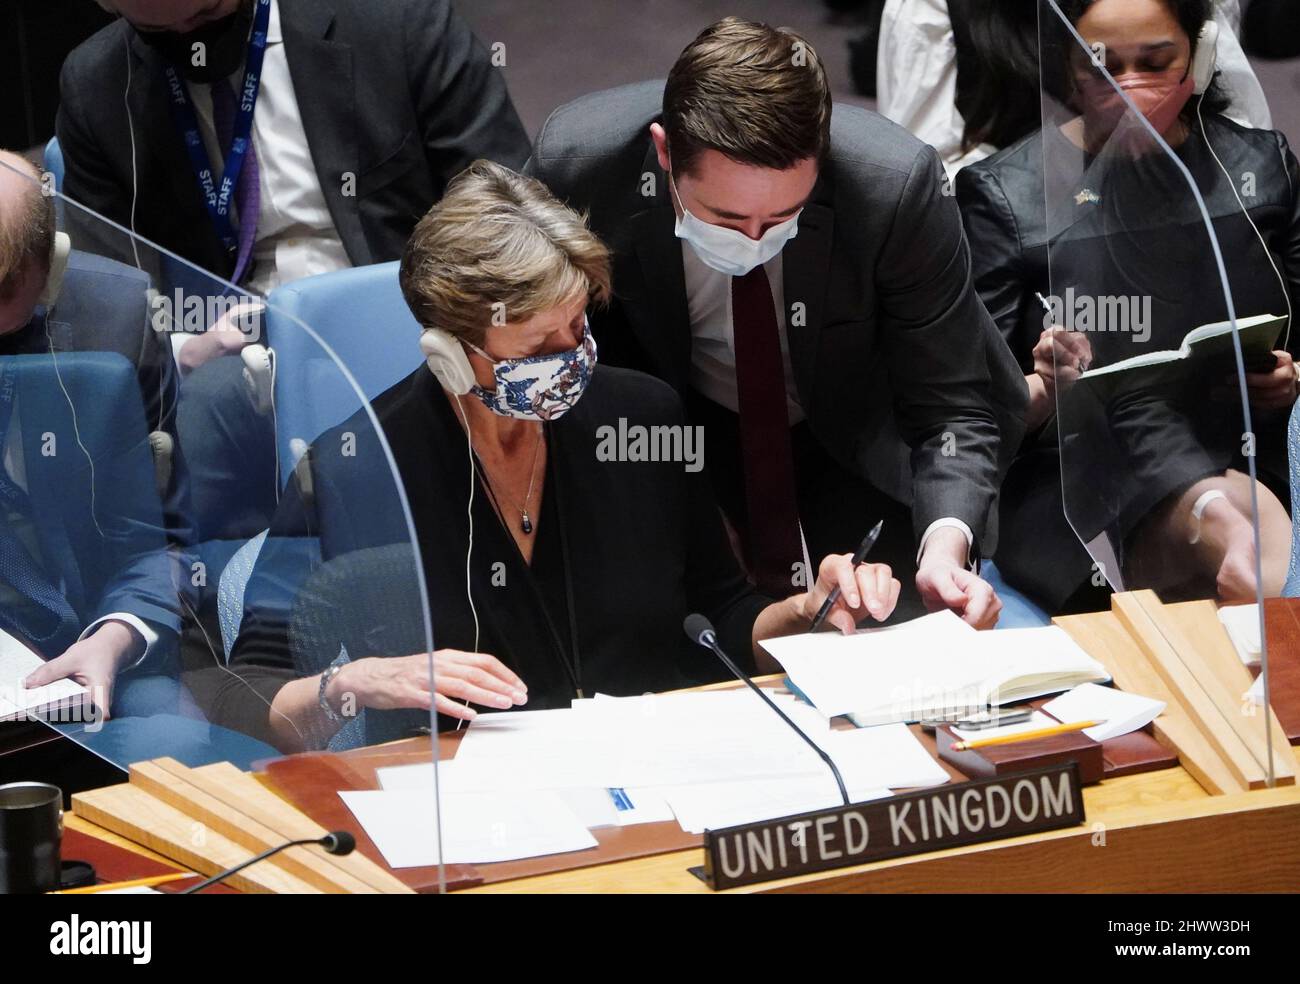 British Ambassador to the U.N. Barbara Woodward attends a meeting of the United Nations Security Council on Threats to International Peace and Security, following Russia's invasion of Ukraine, in New York City, U.S., March 7, 2022. REUTERS/Carlo Allegri Stock Photo